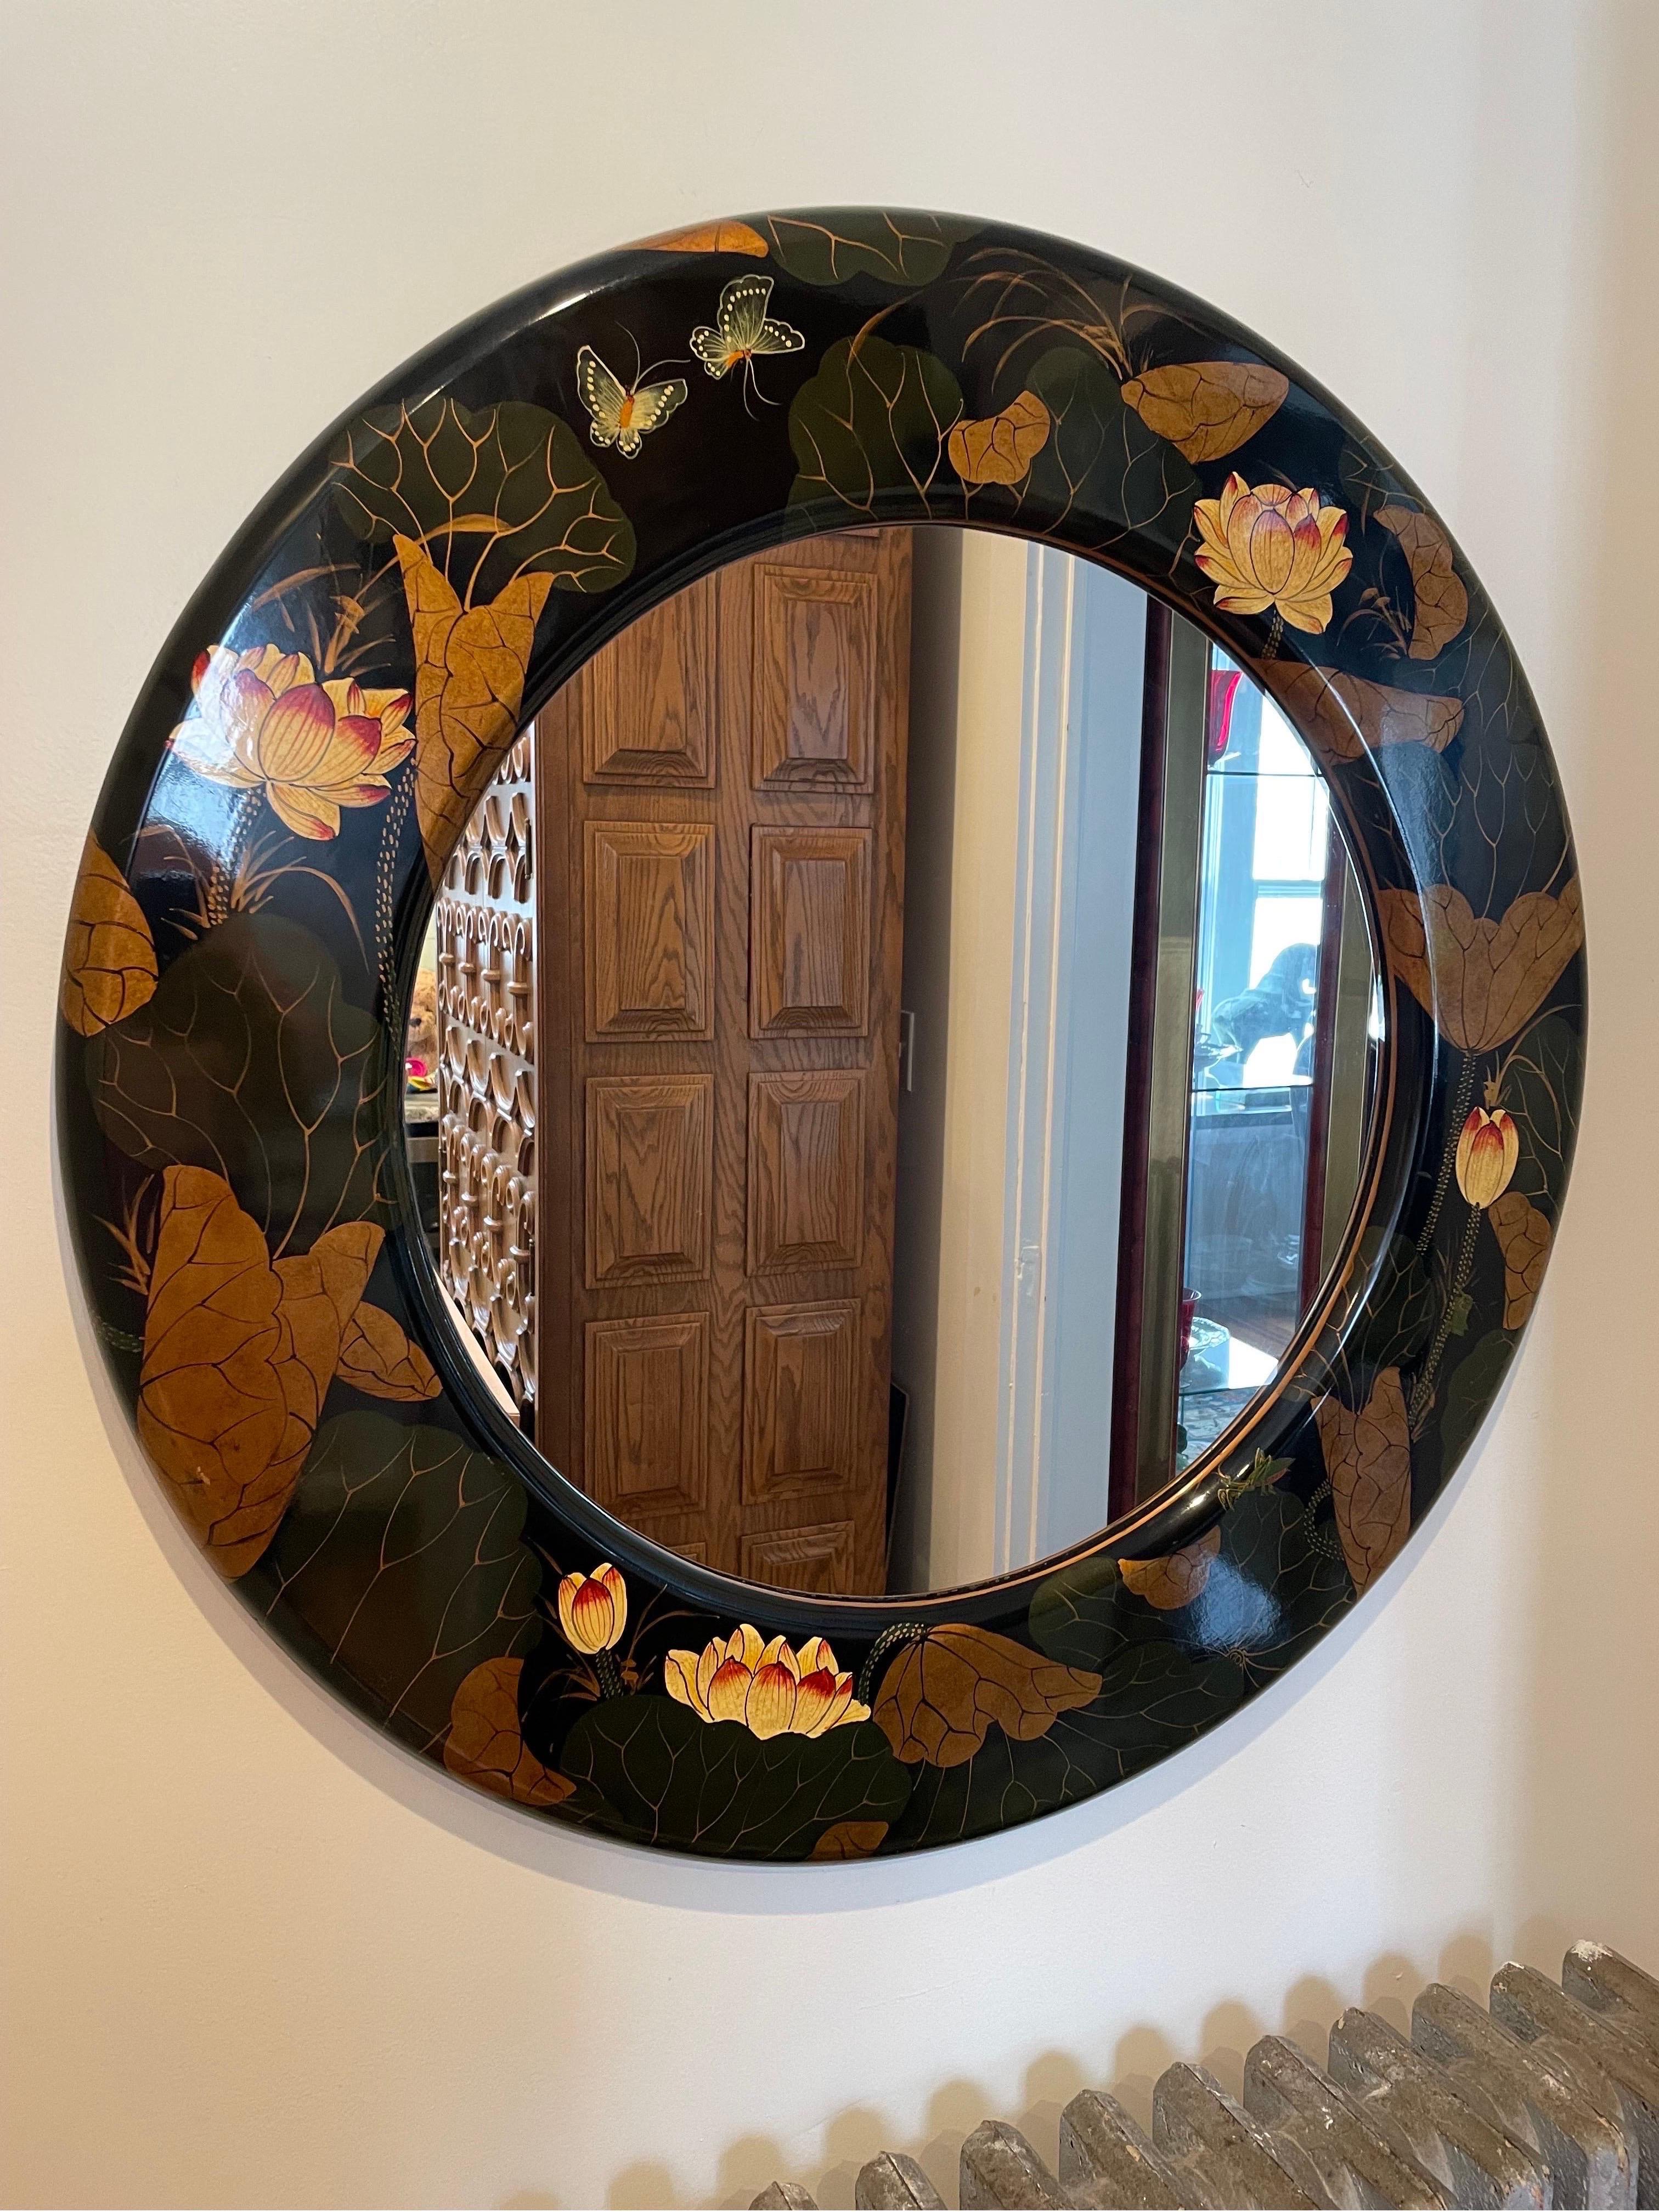 Lacquer circular wall mirror by Maitland Smith. Classic Chinoiserie styling. Lotus Graphics.
Curbside to NYC/Philly $300.